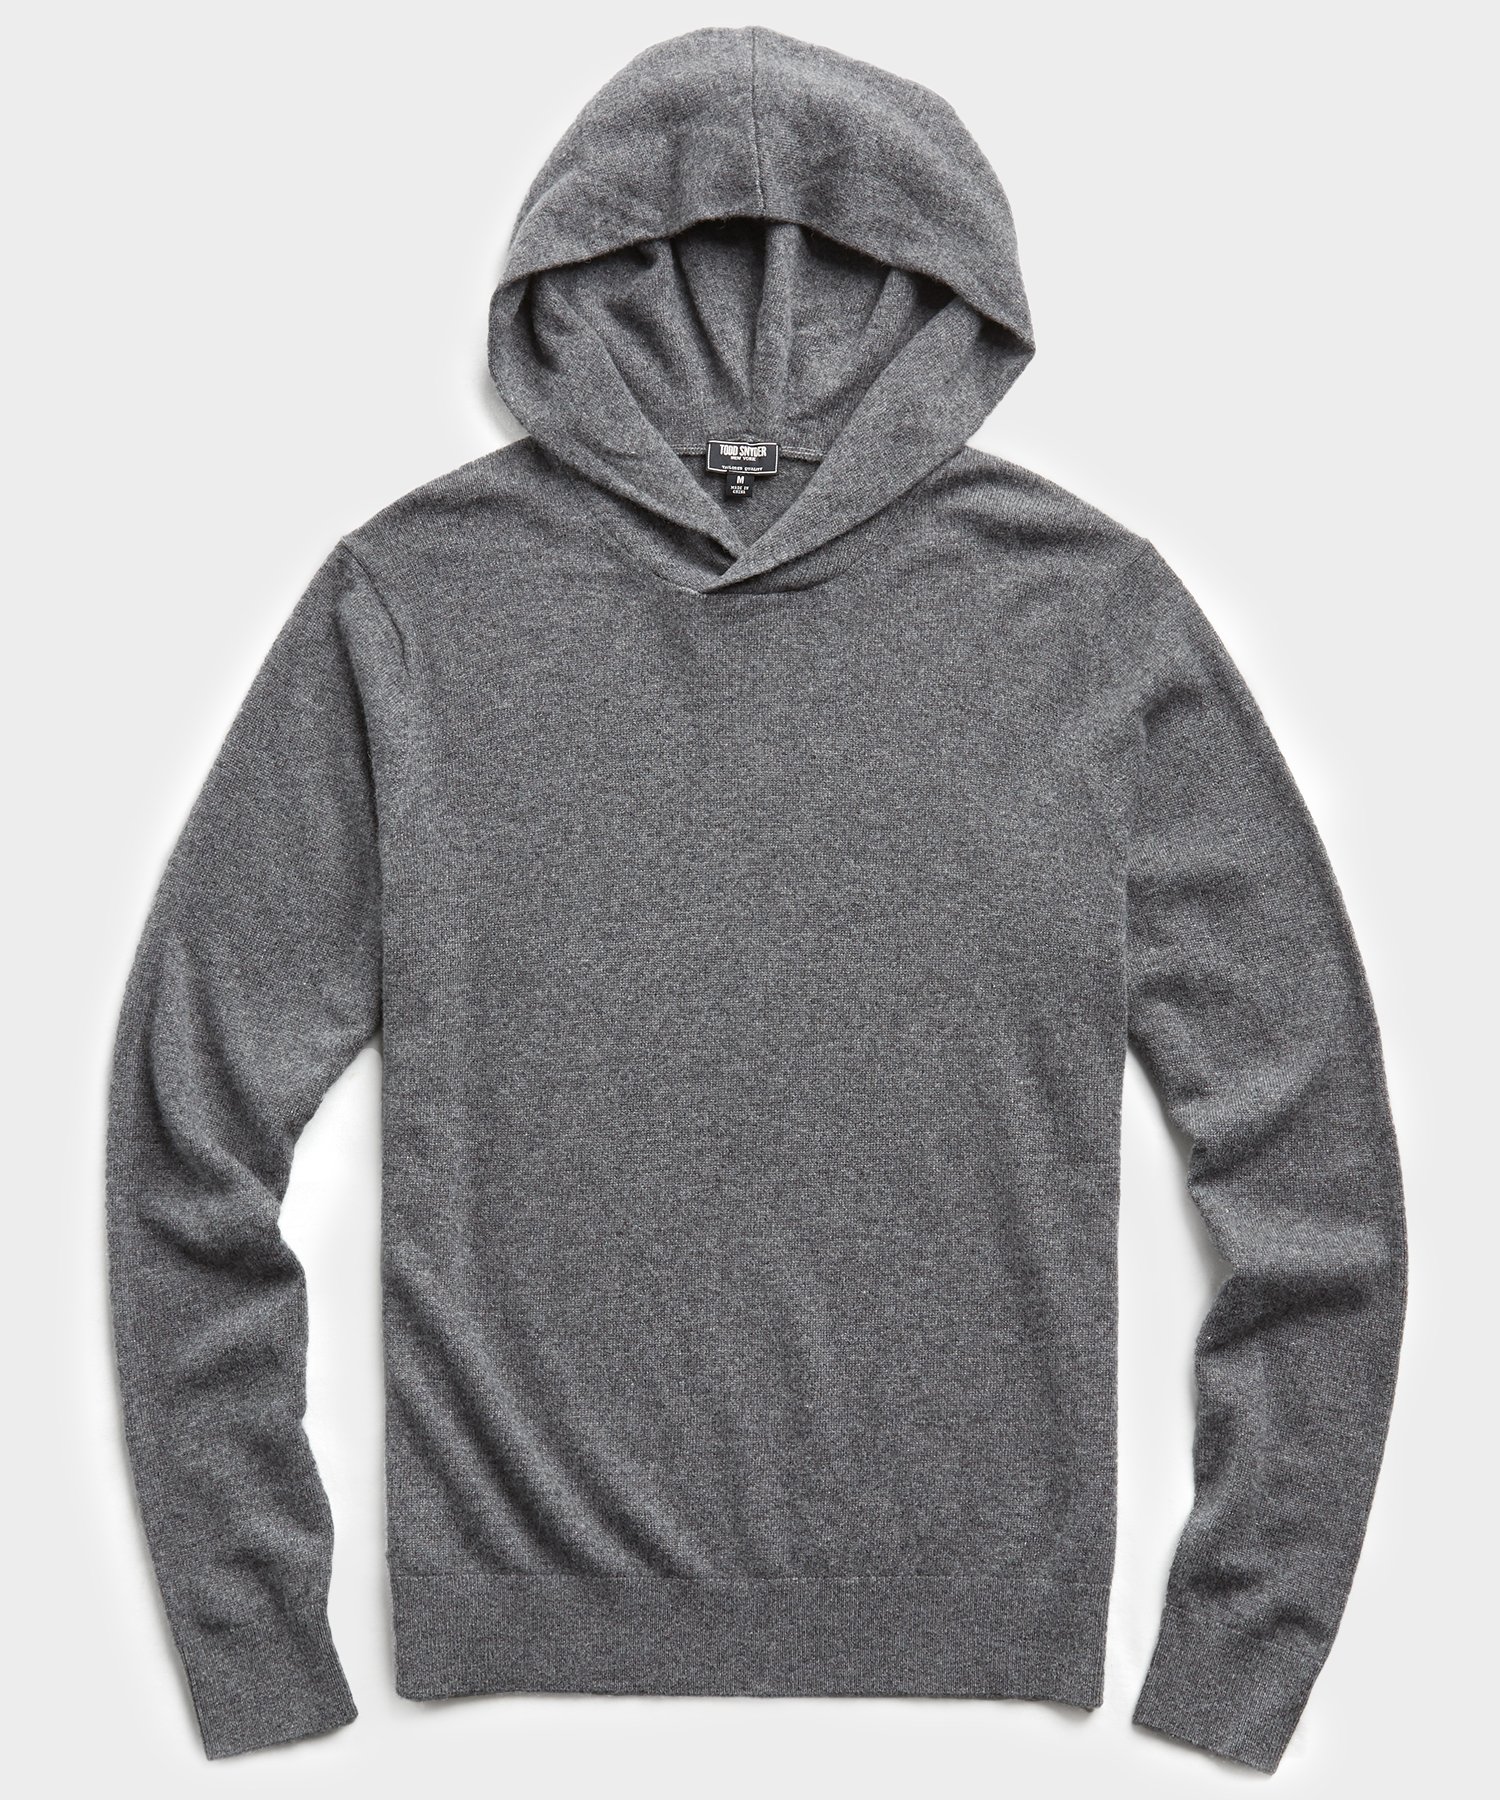 Cashmere Hoodie in Charcoal | The Fashionisto